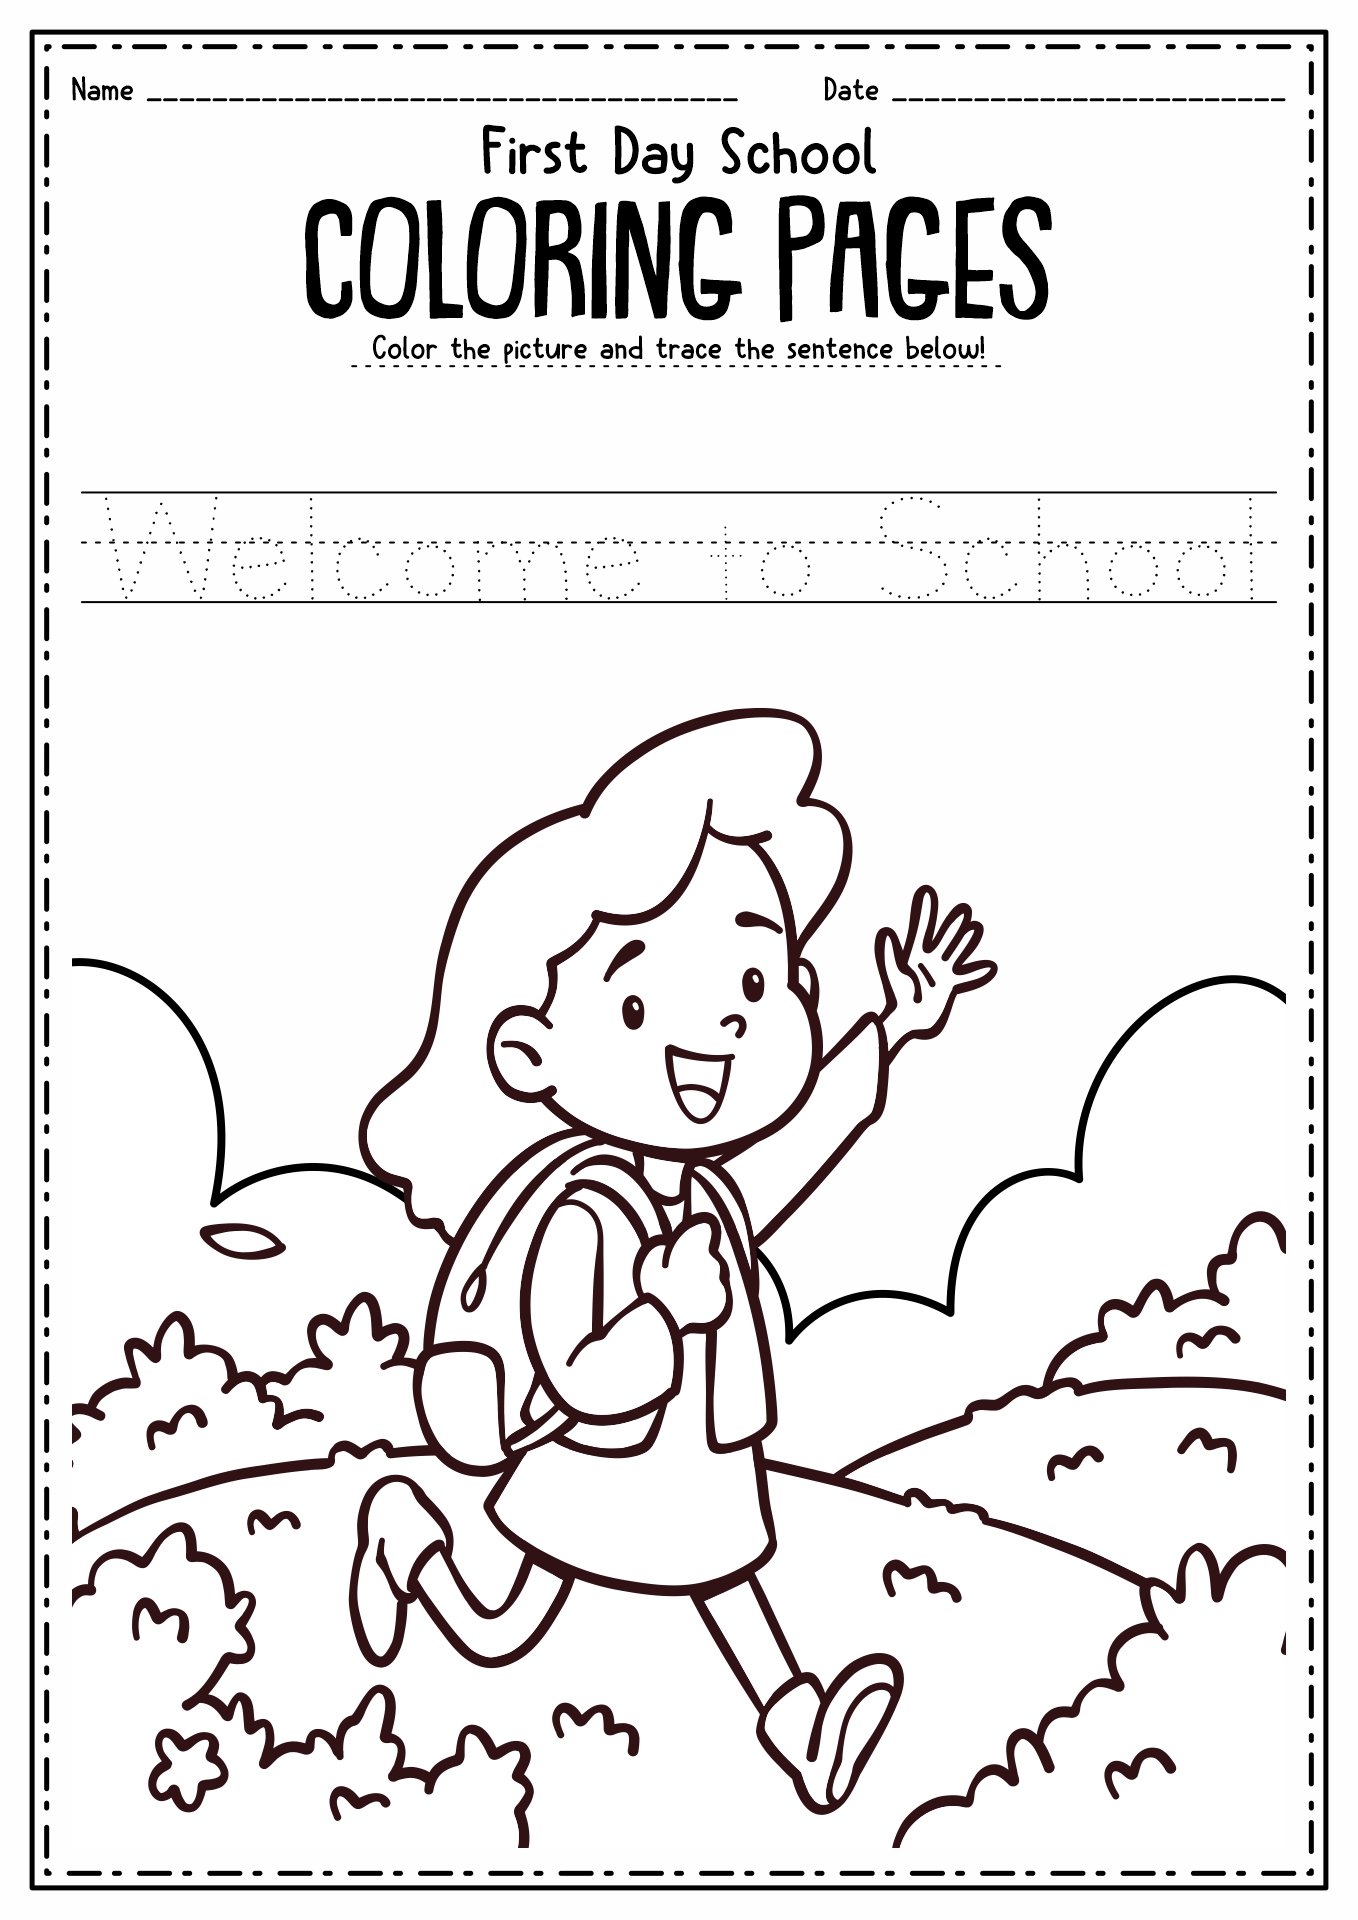 First Day School Kindergarten Coloring Pages Image